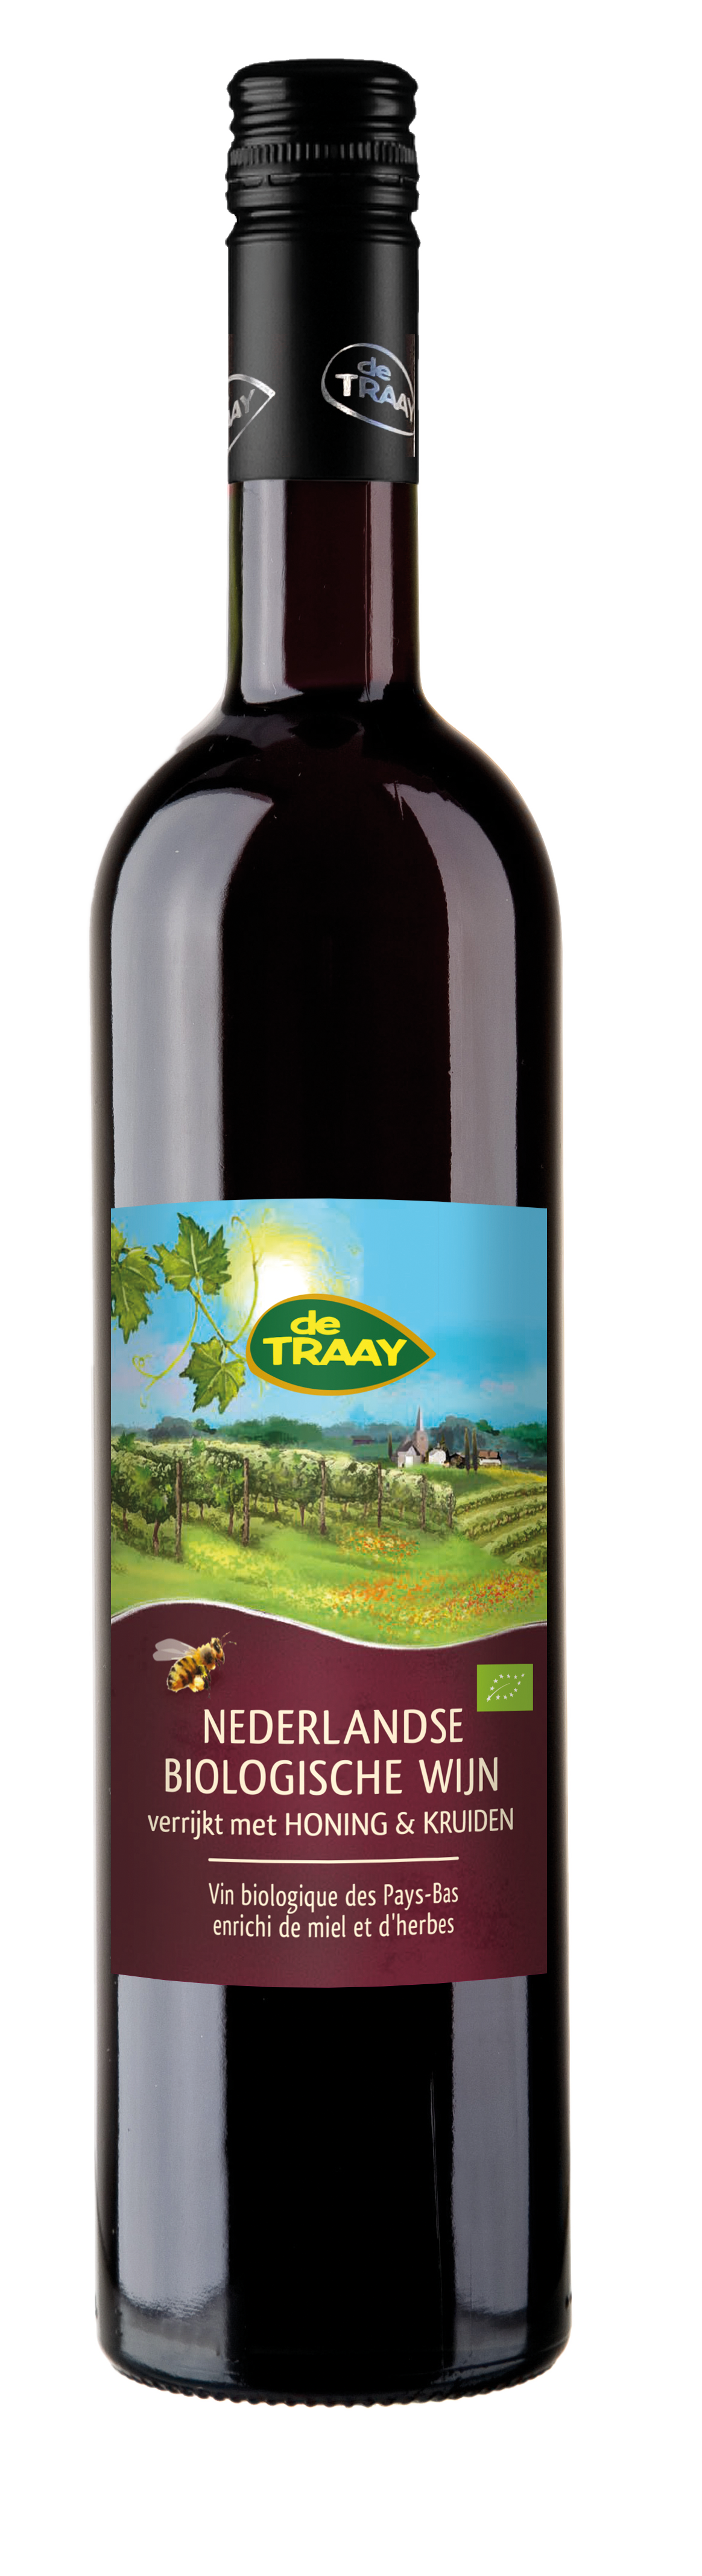 Dutch organic red wine enriched with honey & herbs